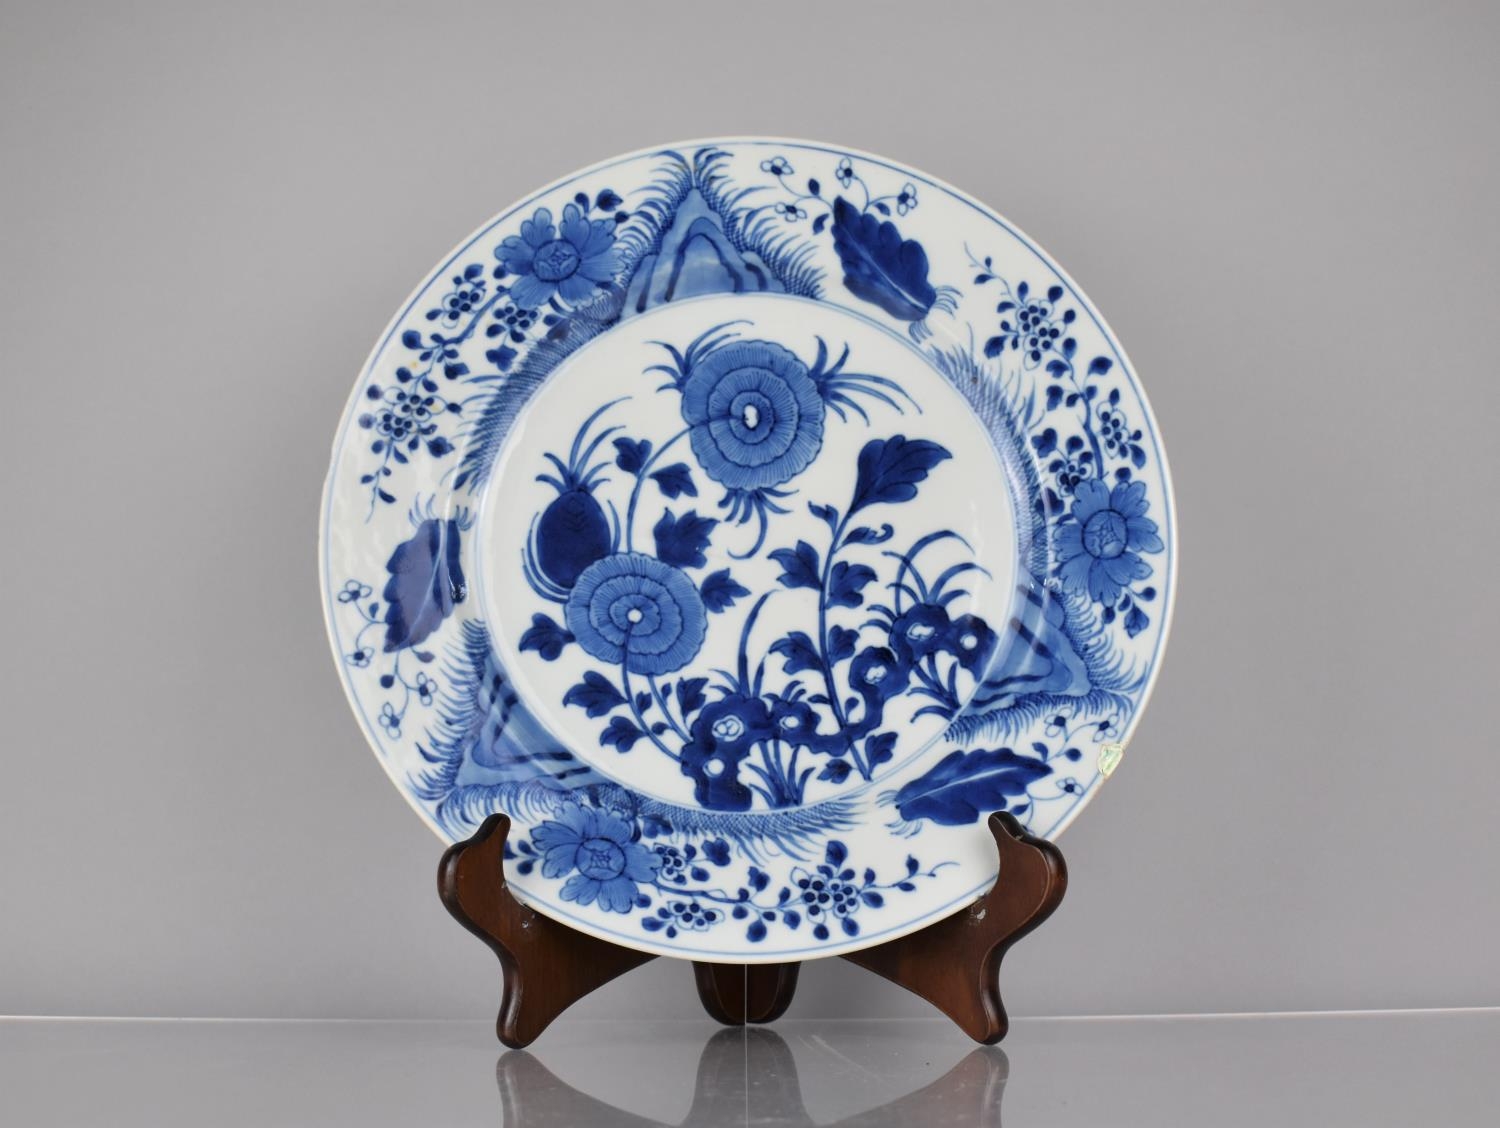 A 19th Century Chinese Porcelain Blue and White Plate Decorated in a Floral Motif, the back with - Image 3 of 4